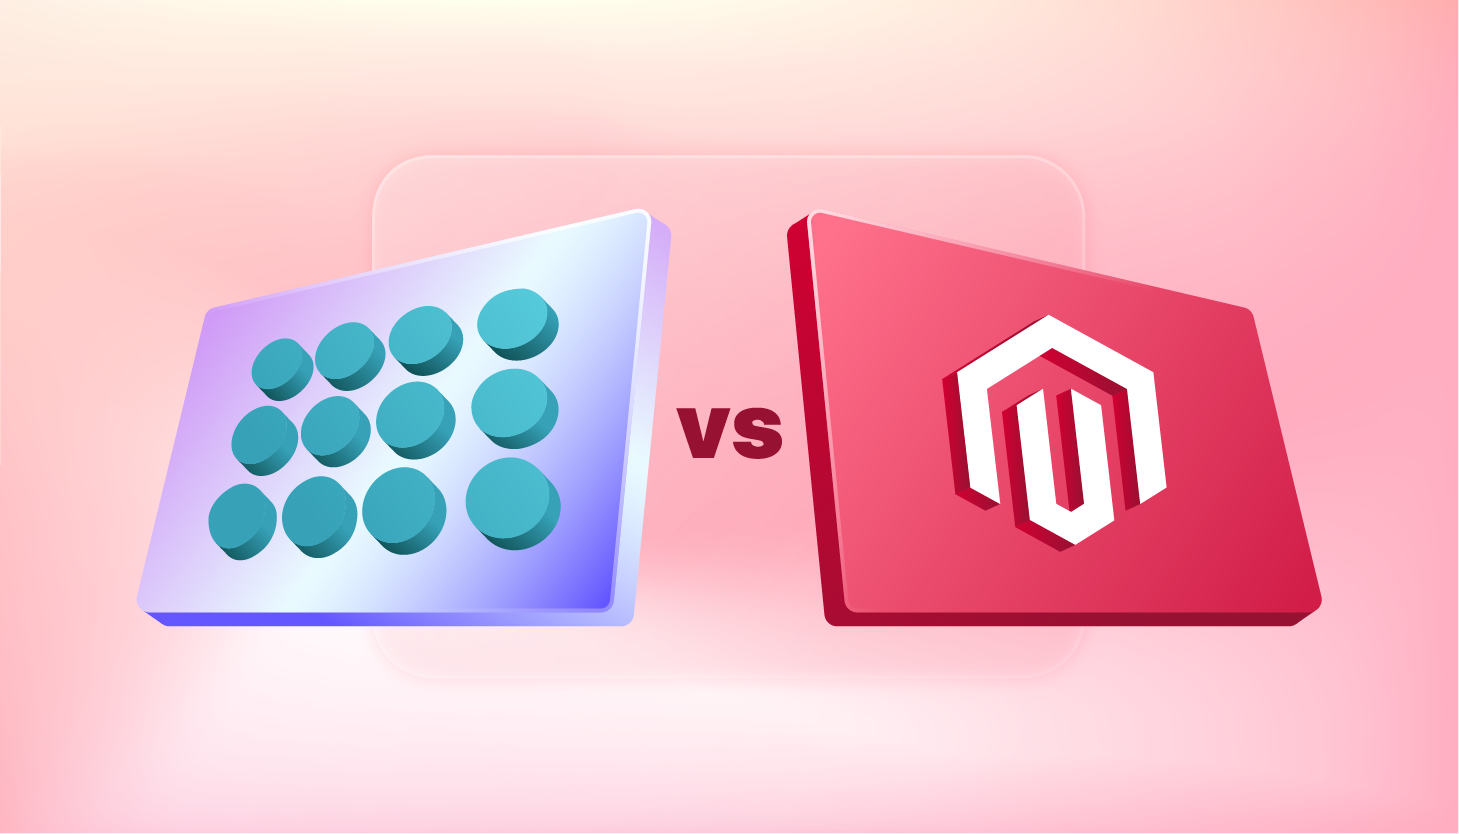 NopCommerce vs Magento: Similarities and Differences